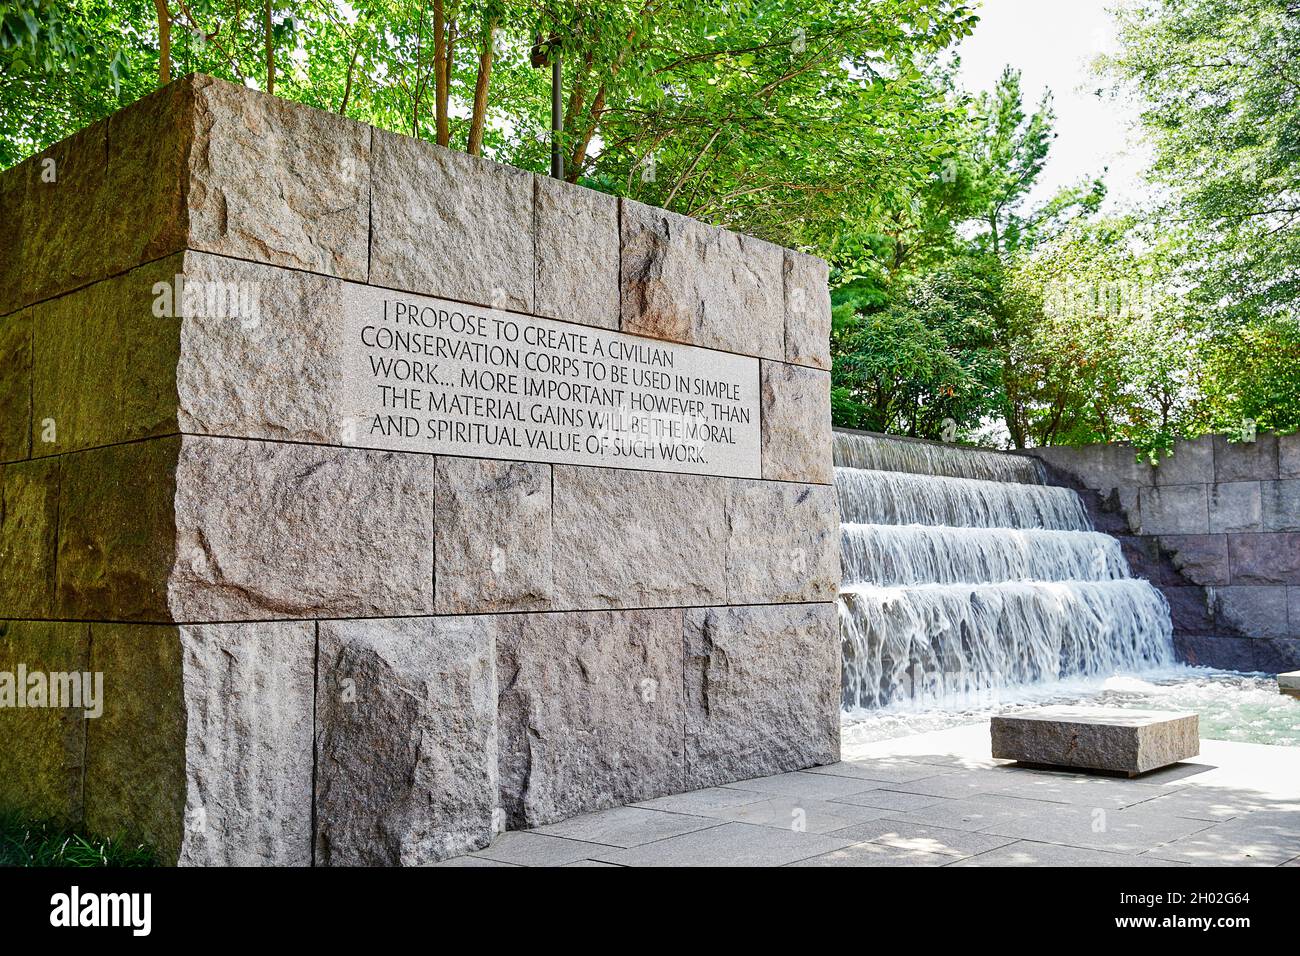 President of the United States Franklin Roosevelt memorial in Washington DC Stock Photo